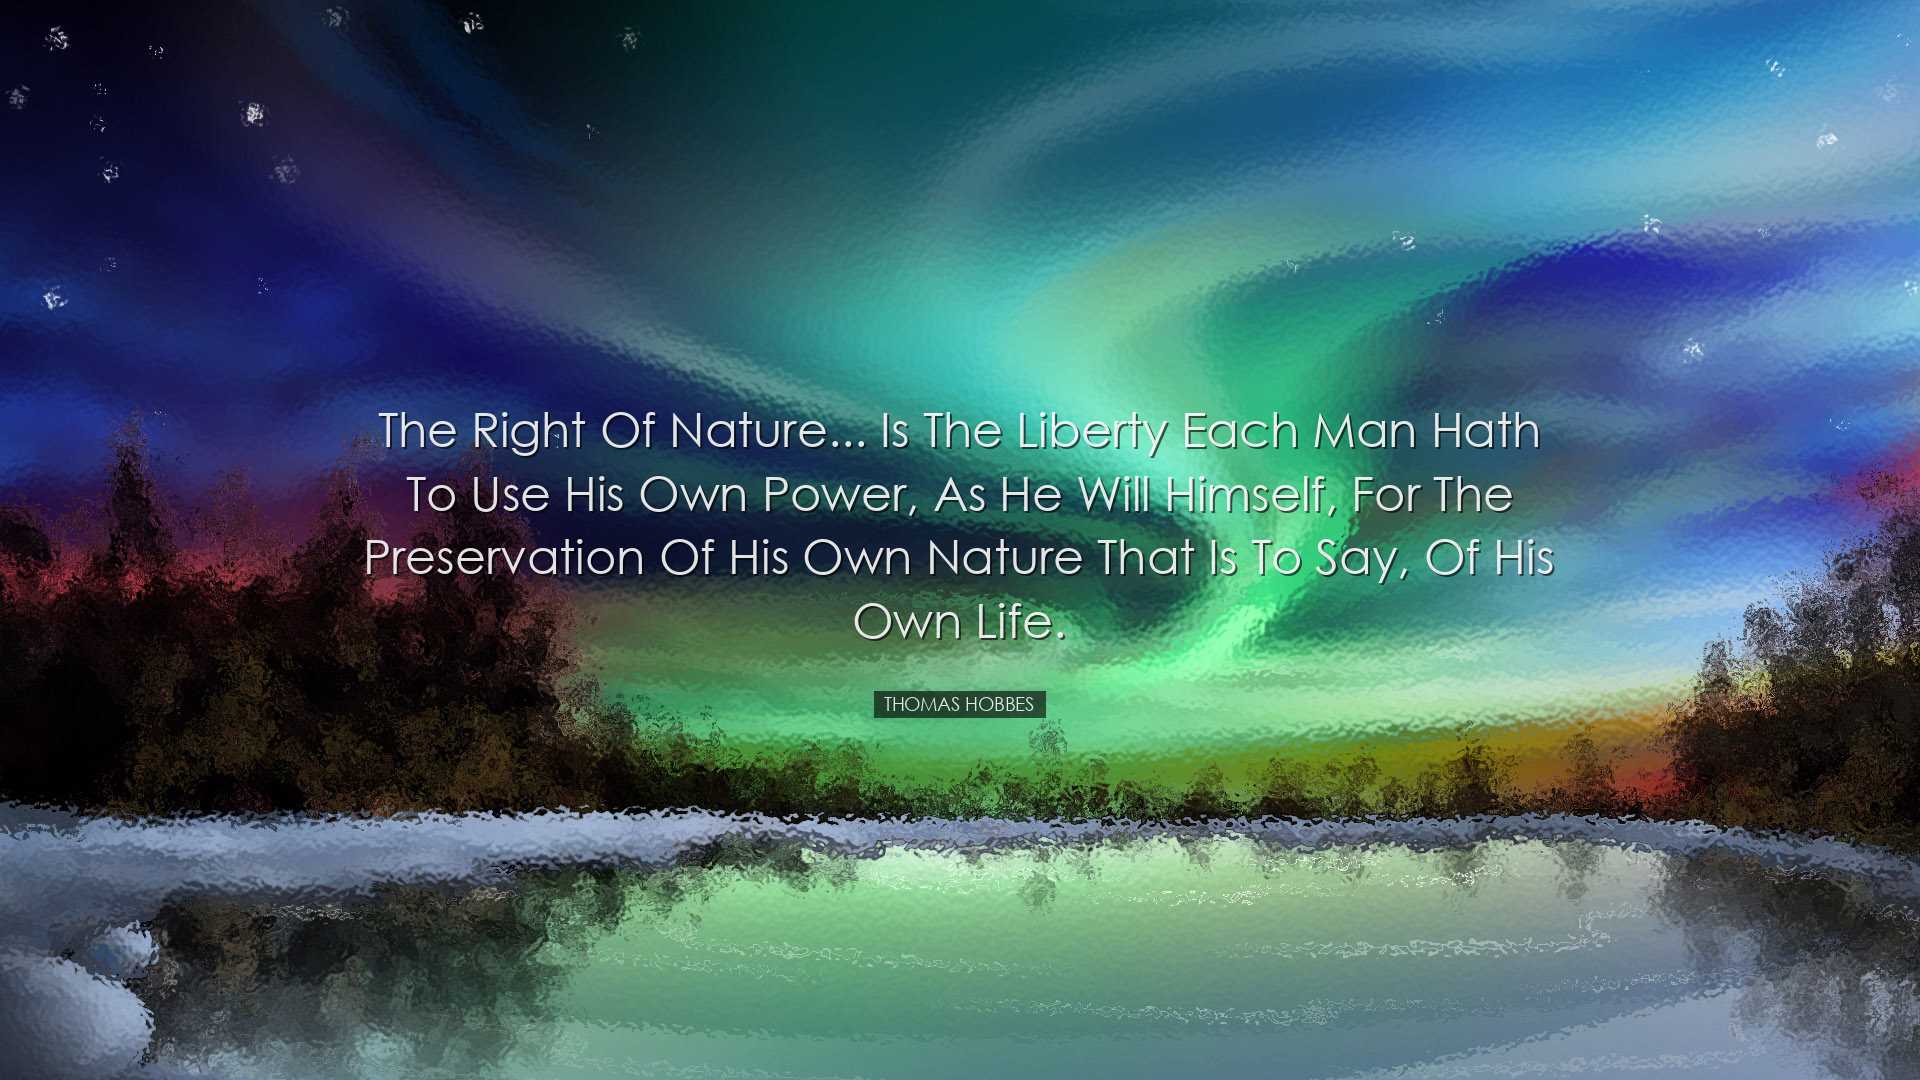 The right of nature... is the liberty each man hath to use his own